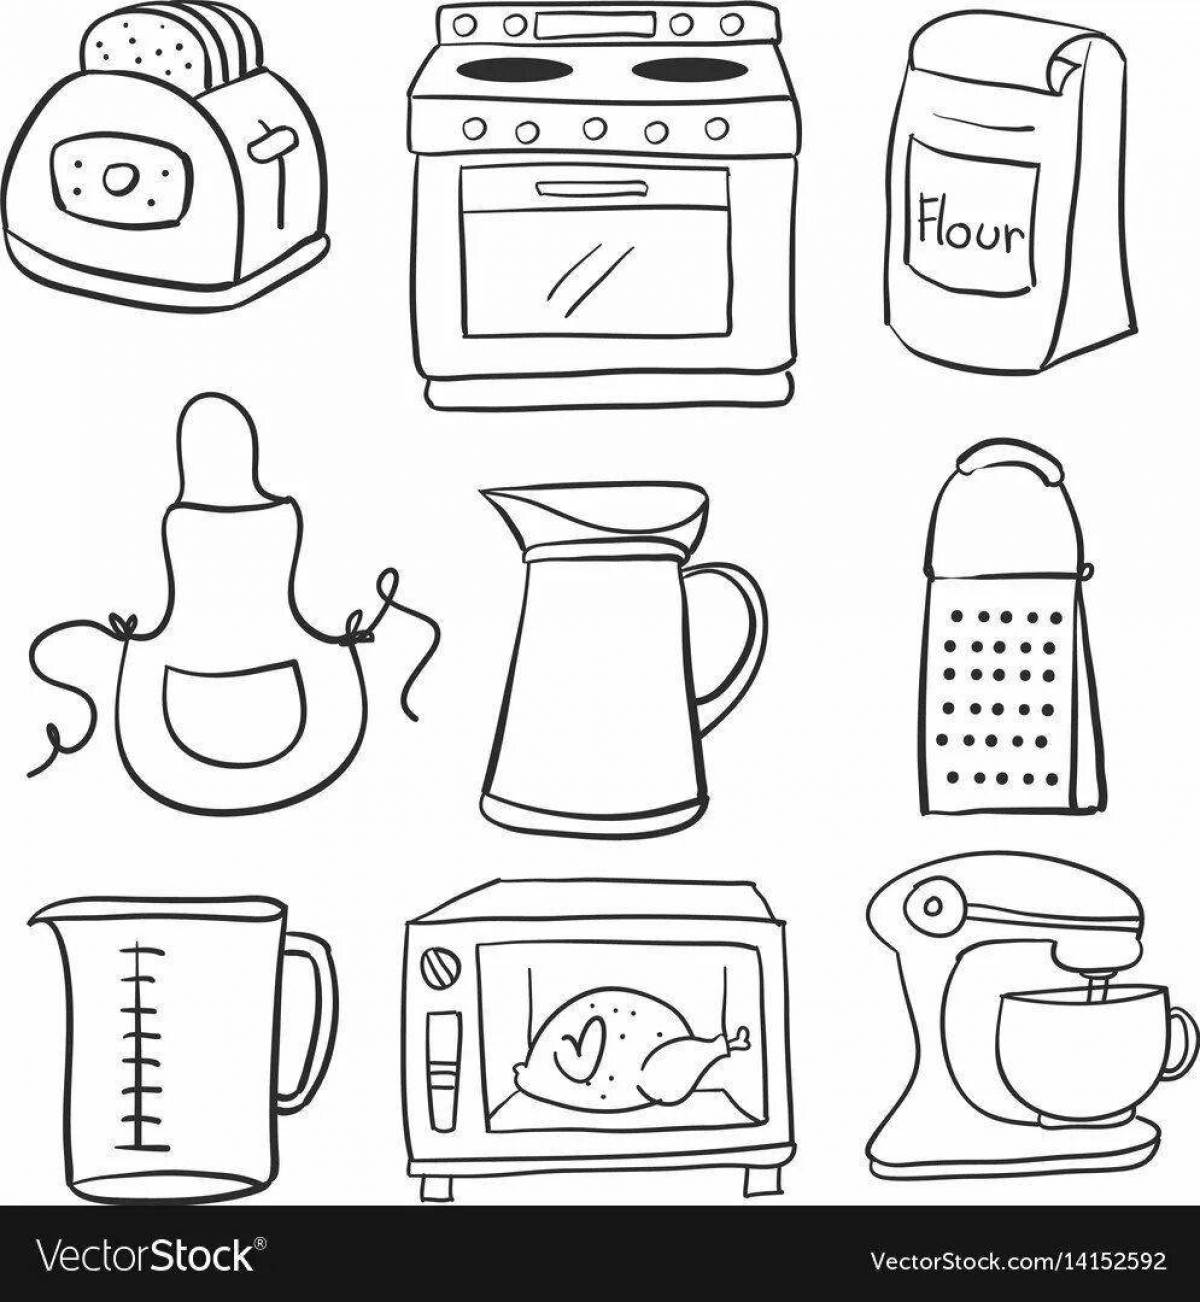 Entertaining coloring of household appliances